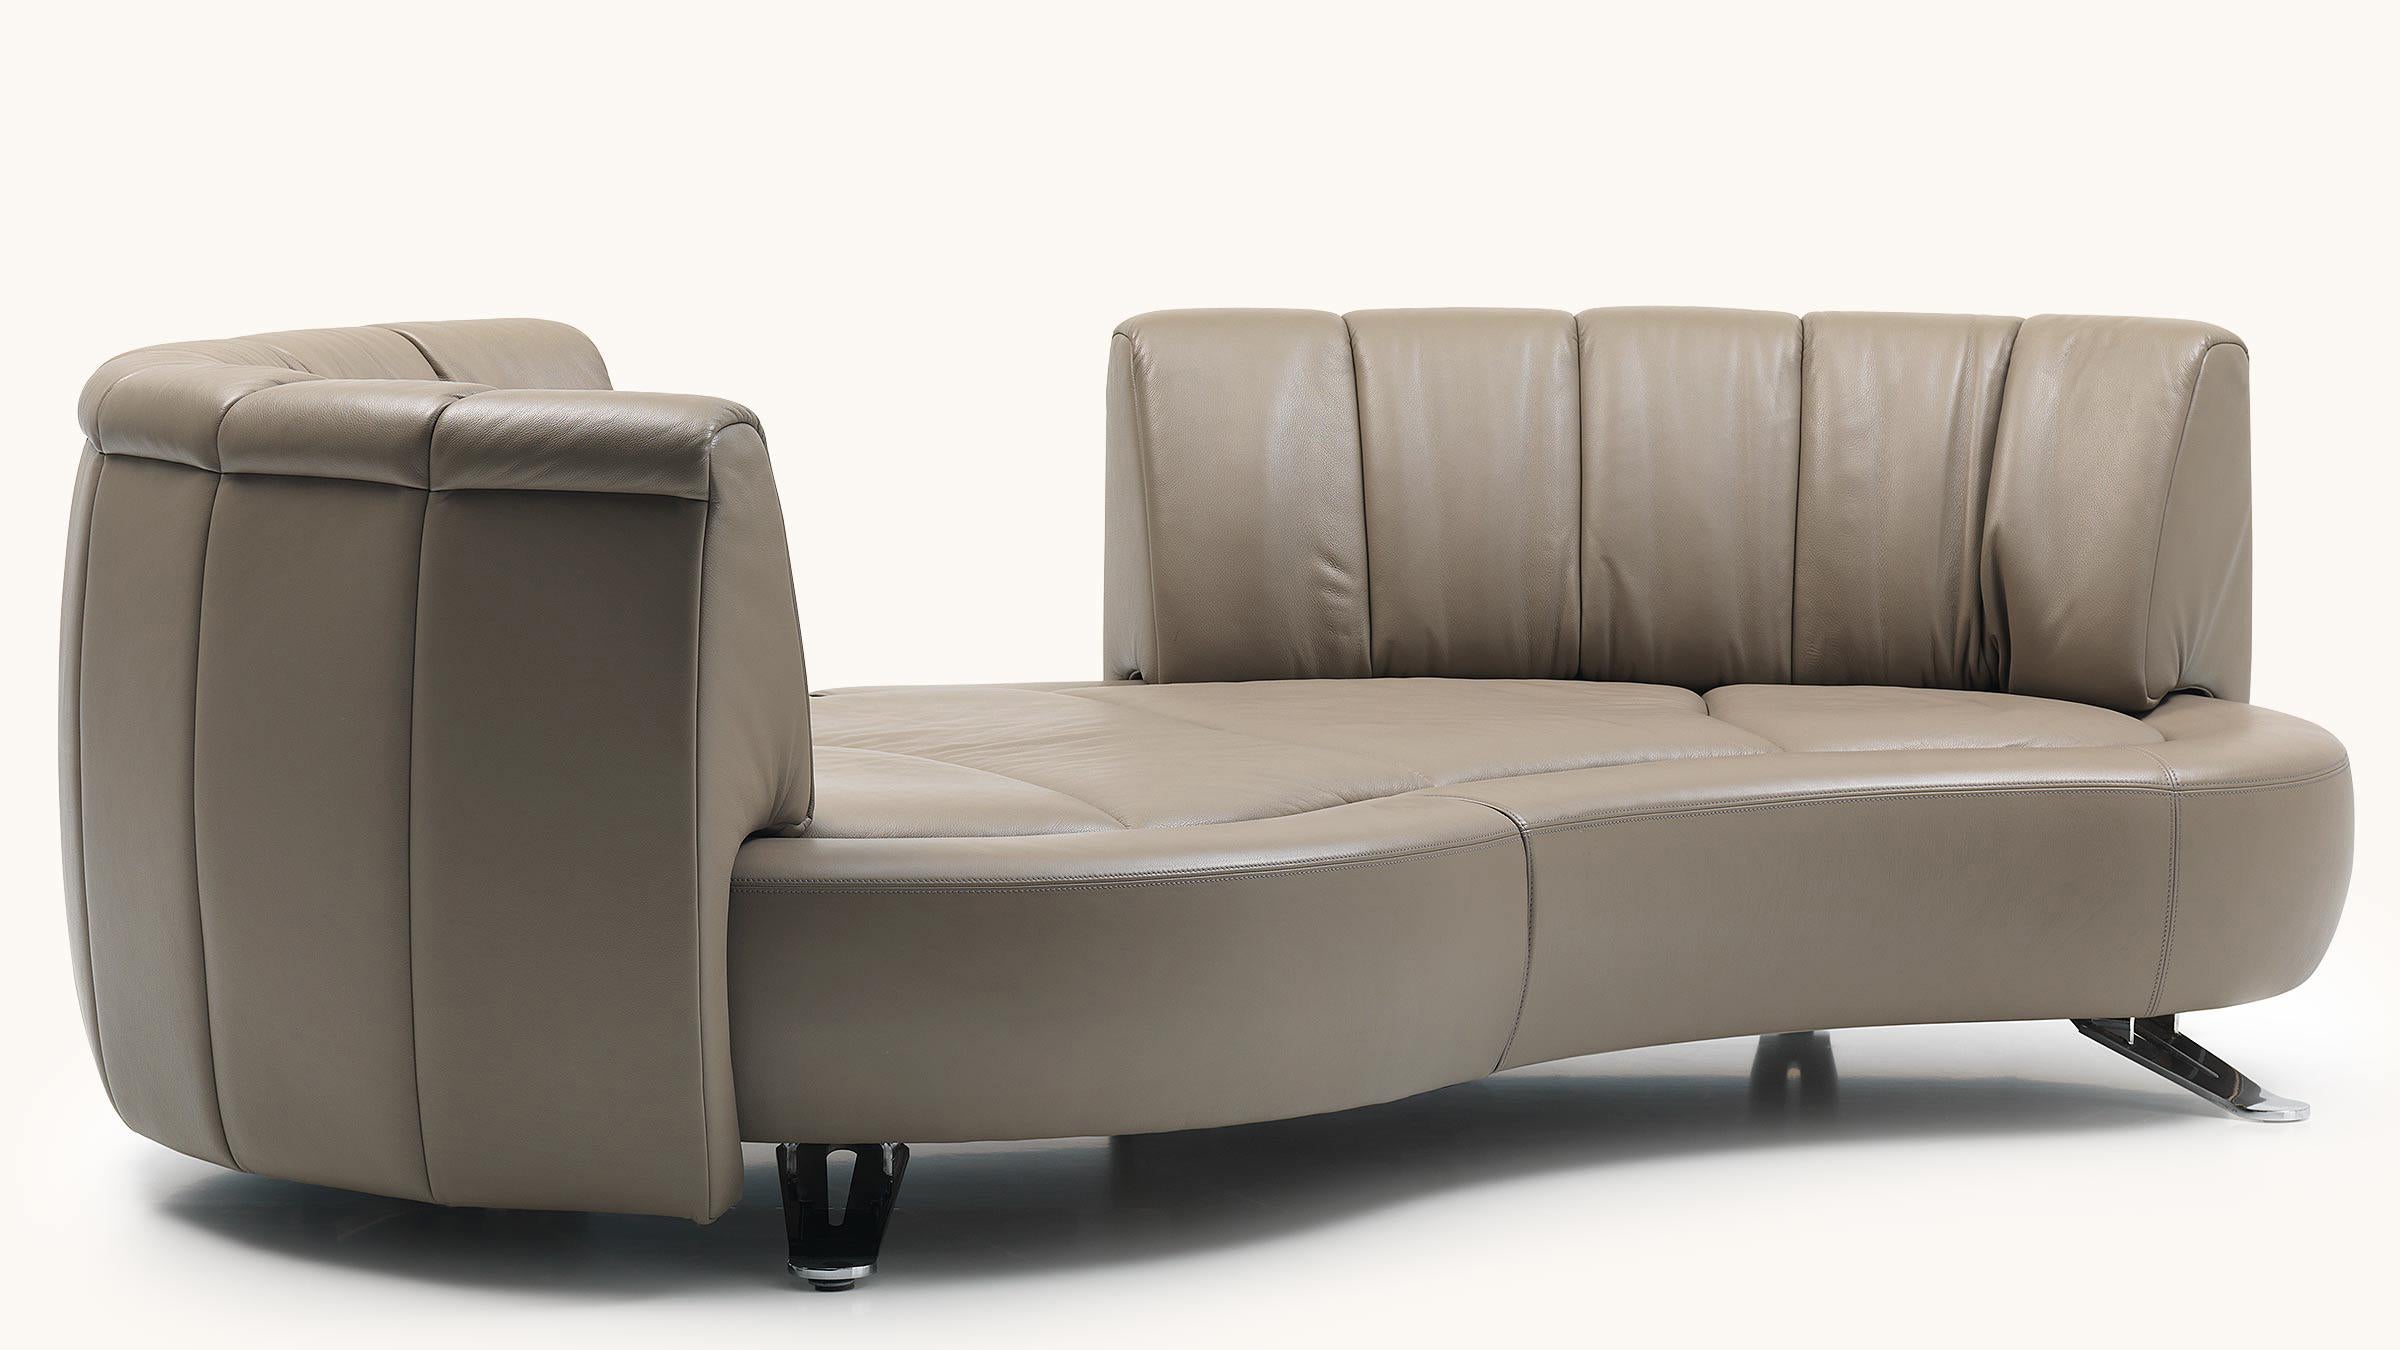 Revolutionary back-push mechanism DS-164 can be transformed from an open sofa into an elegant chaise loungein a single movement, while the backrest can be stylefull rotated infinitely by 360°. The modular seat island, presented in organic curves,